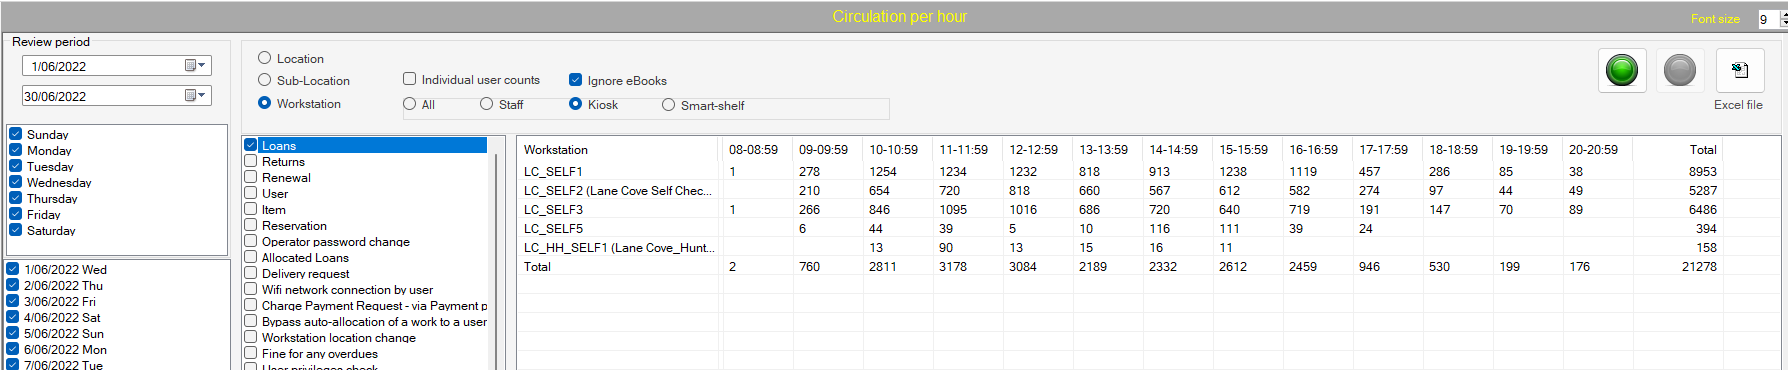 Circulation Per Hour - Workstation results